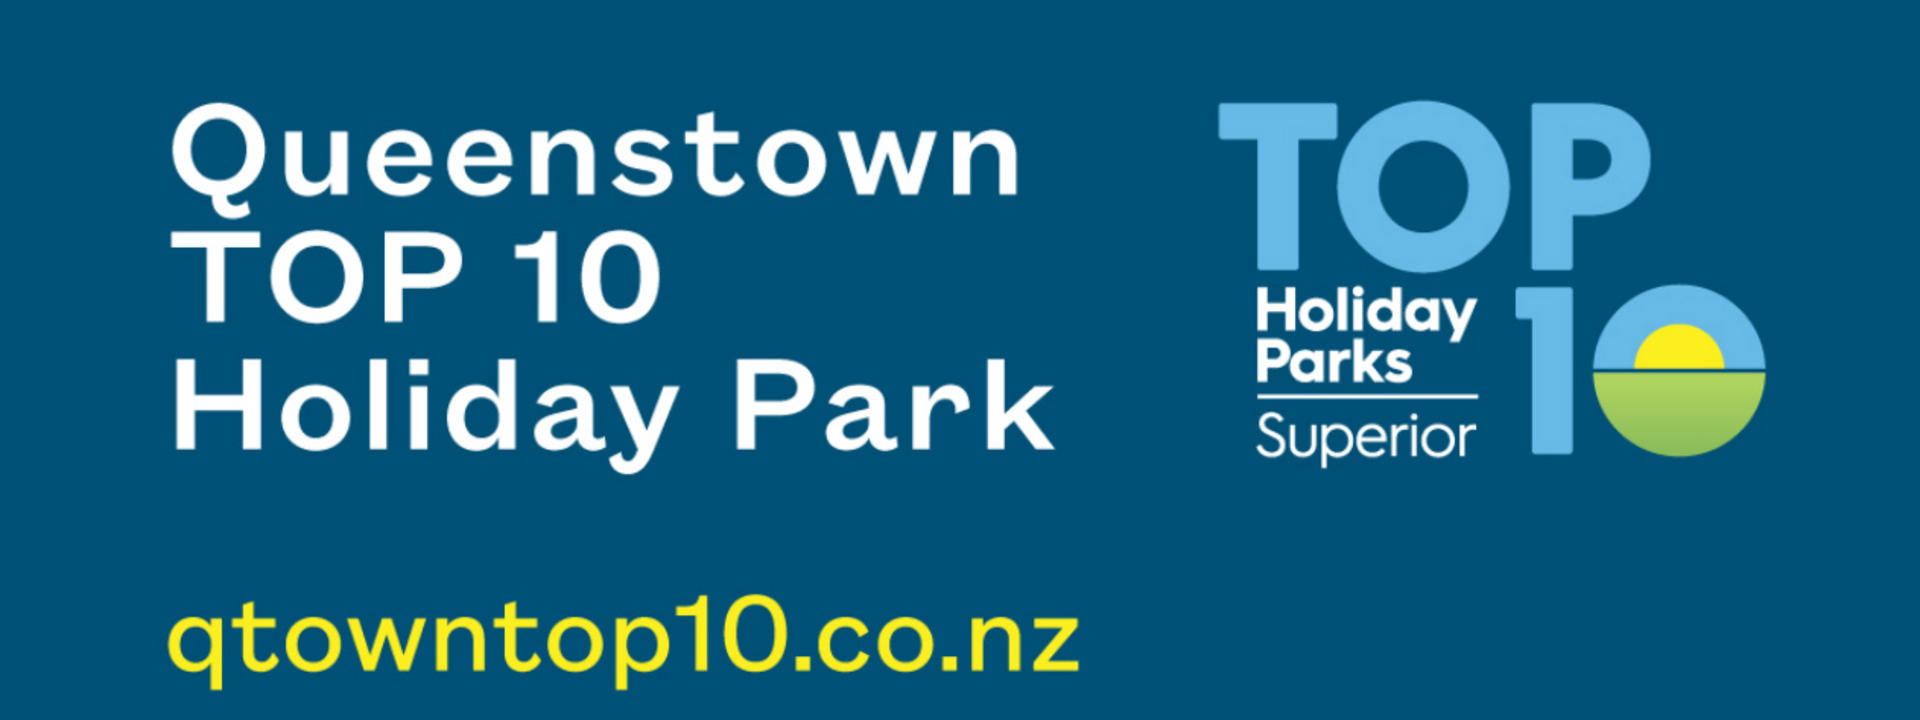 Logo: Queenstown TOP 10 Holiday Park